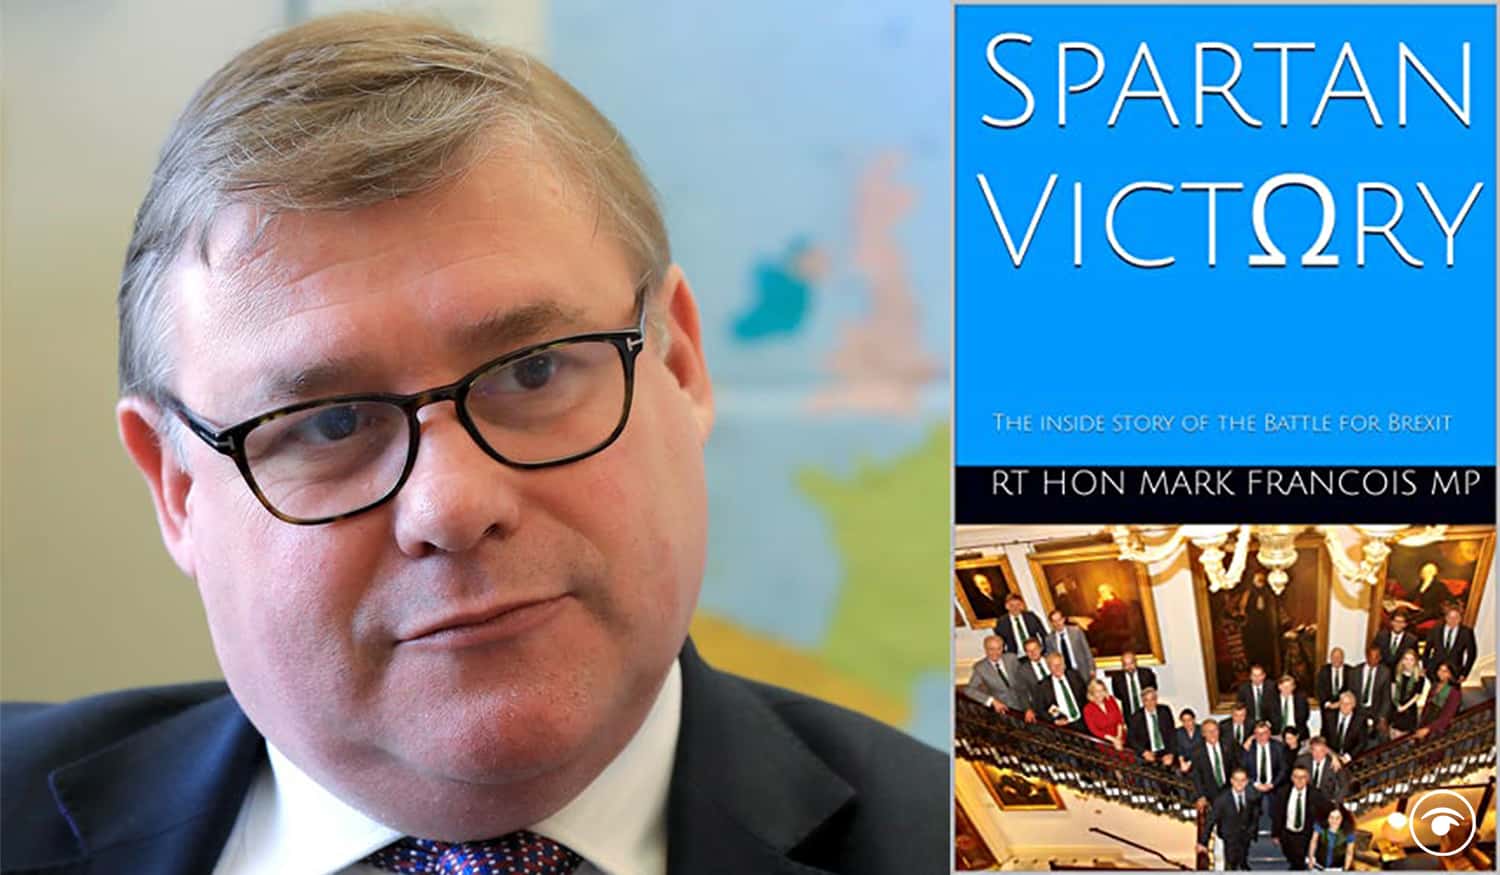 Book reviews of Mark Francois’s self-published Brexit book are in